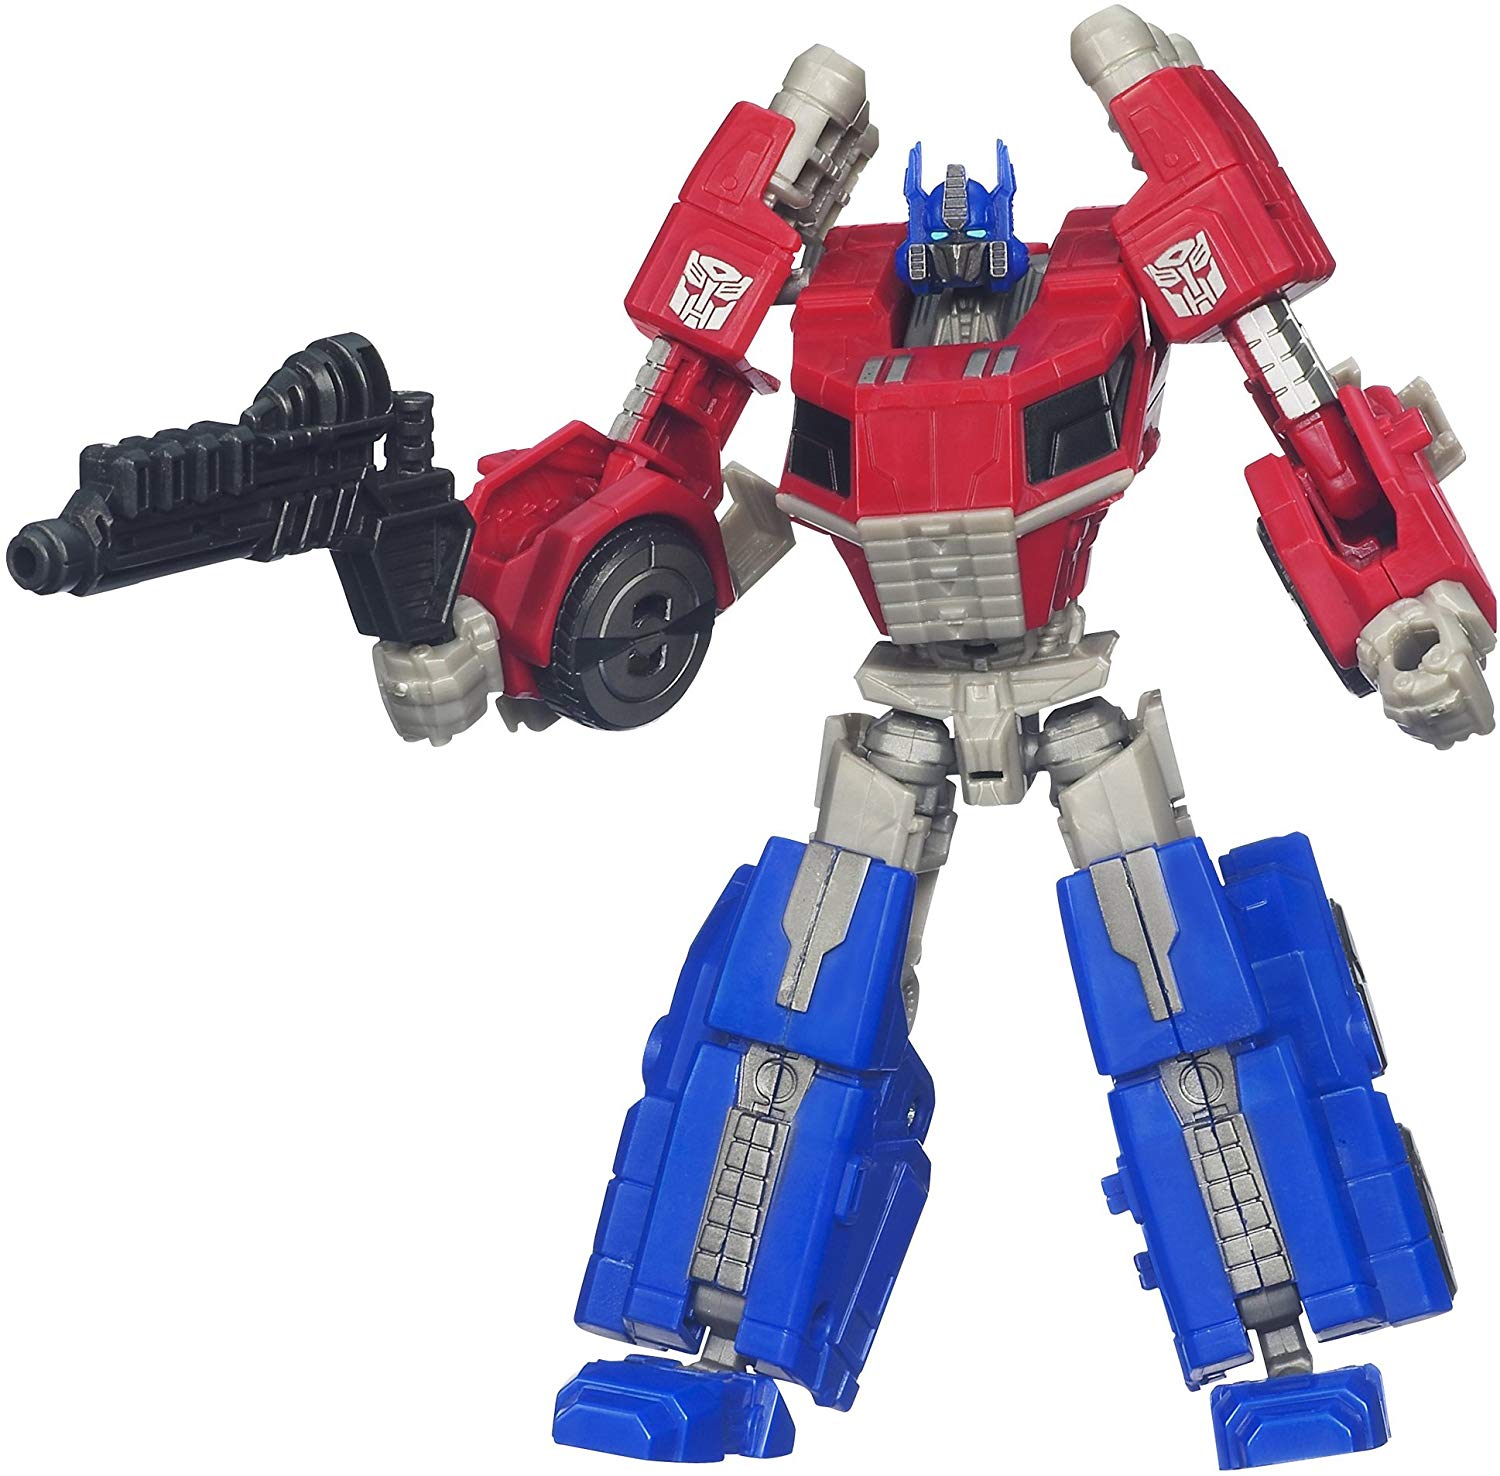 Transformers Generations Fall of Cybertron Optimus Prime Action Figure 2